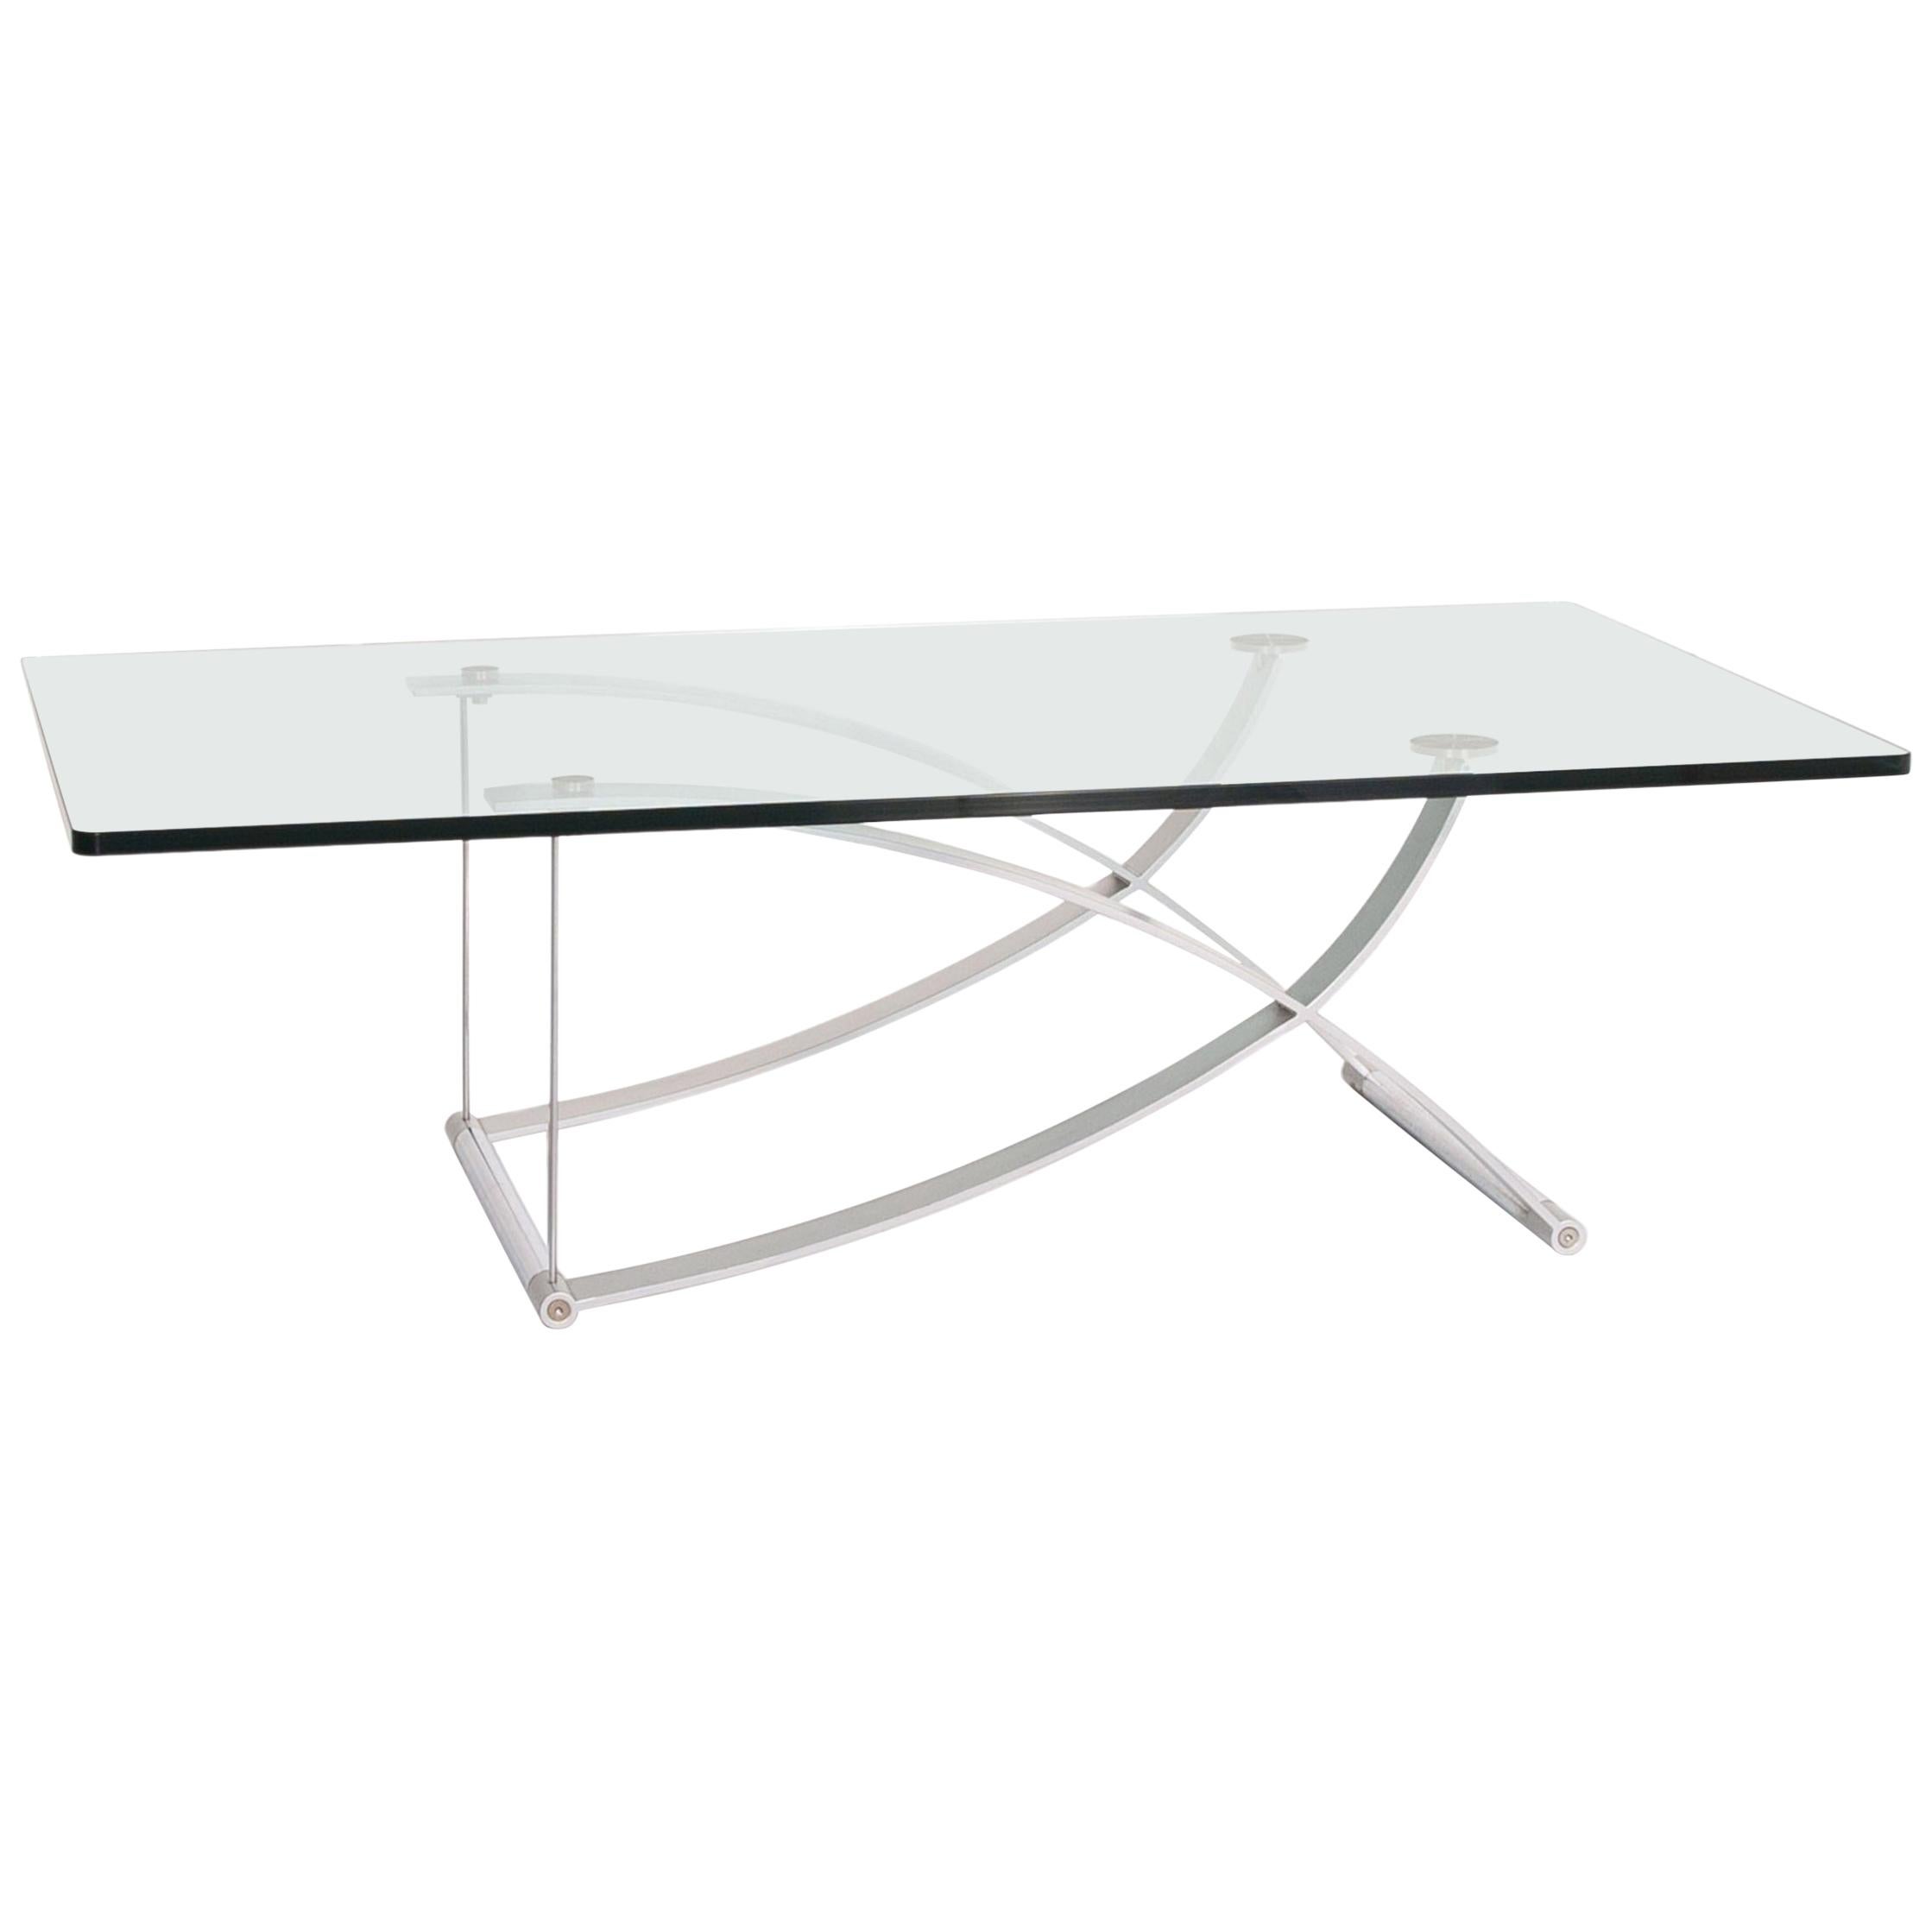 Rolf Benz RB 1150 Glass Coffee Table Metal Table For Sale